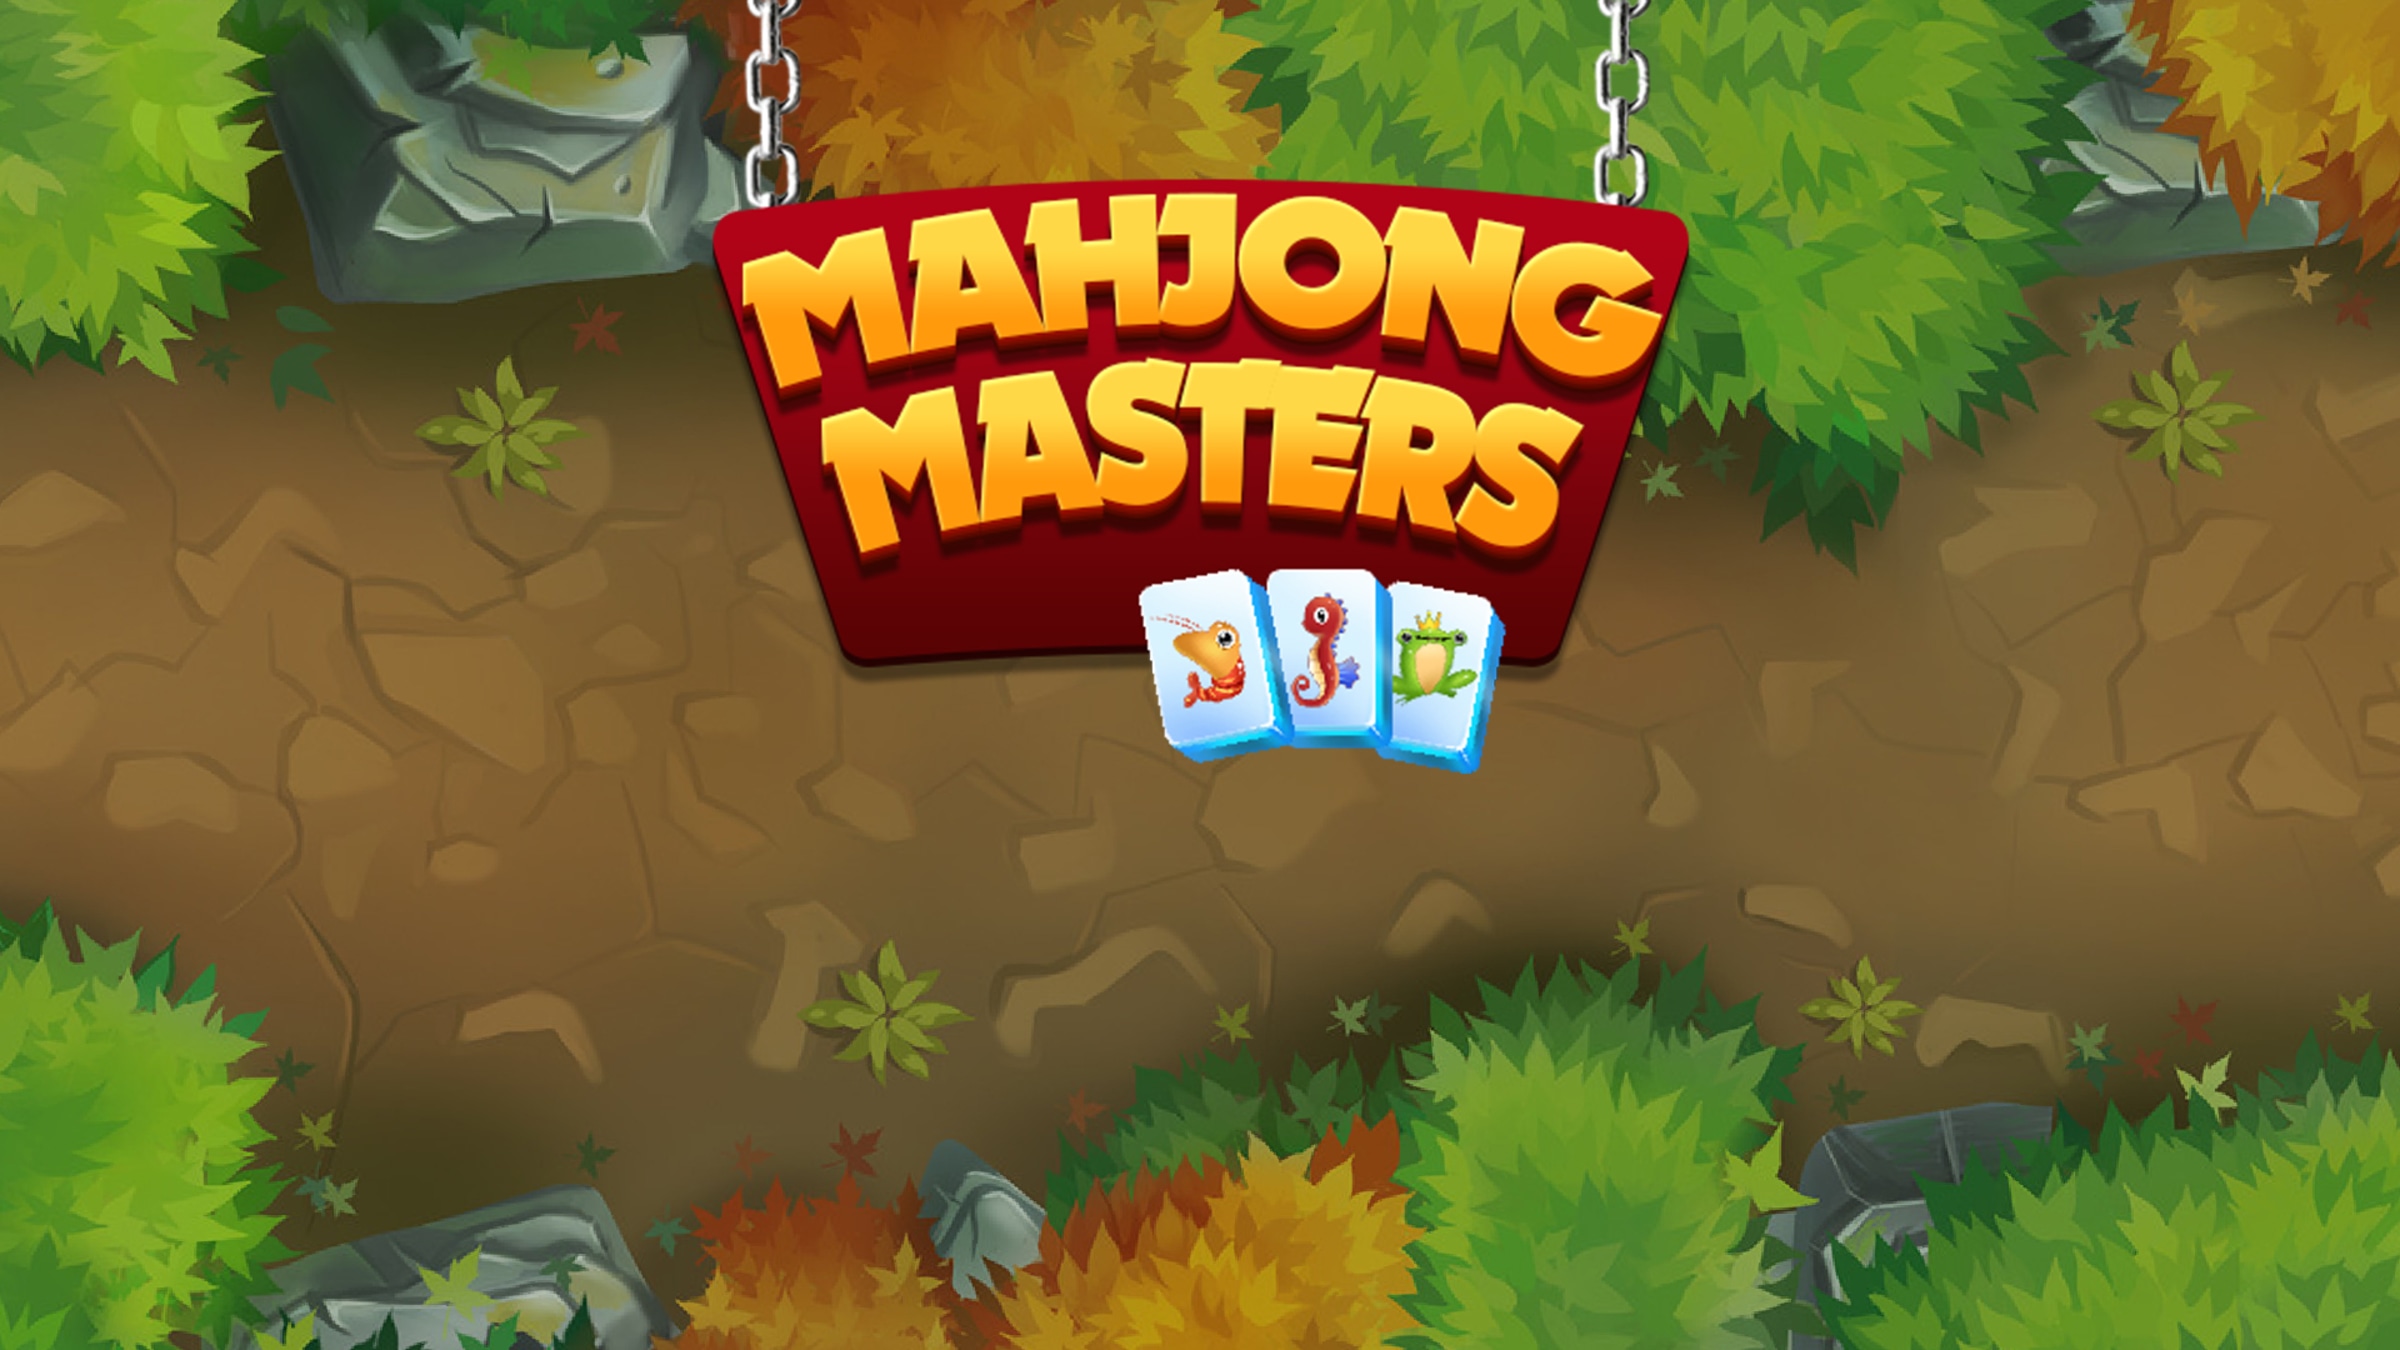 Mahjong Masters for Nintendo Switch - Nintendo Official Site